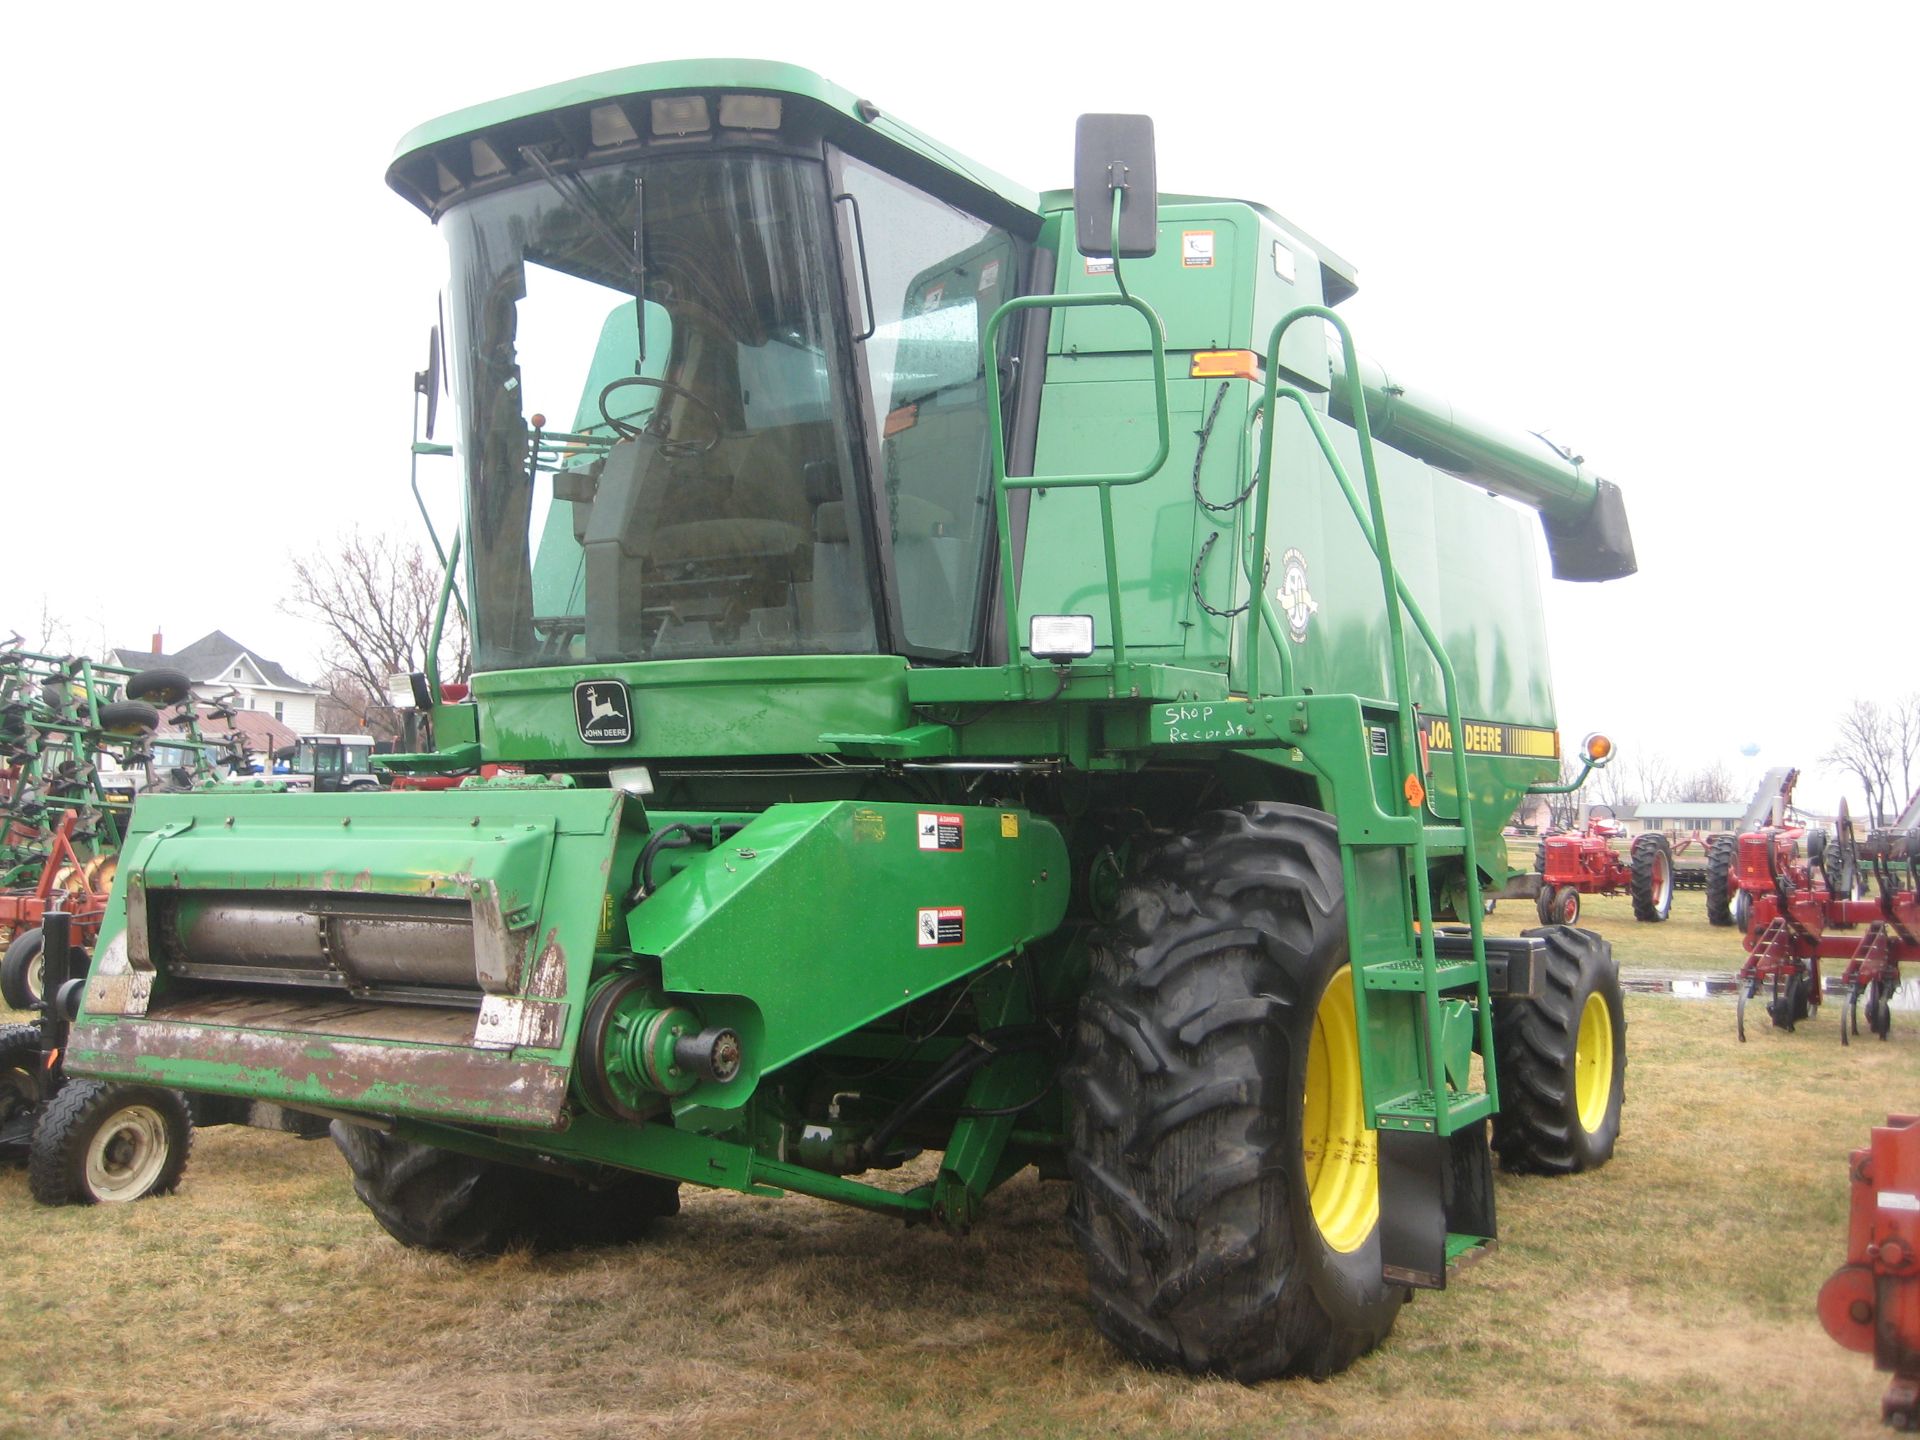 '97 JD 9400, 24.5x32, MAURER EXT., SHAFF SPREADER, WIRED FOR GREEN STAR, 3826/2826 HRS, SN-670541